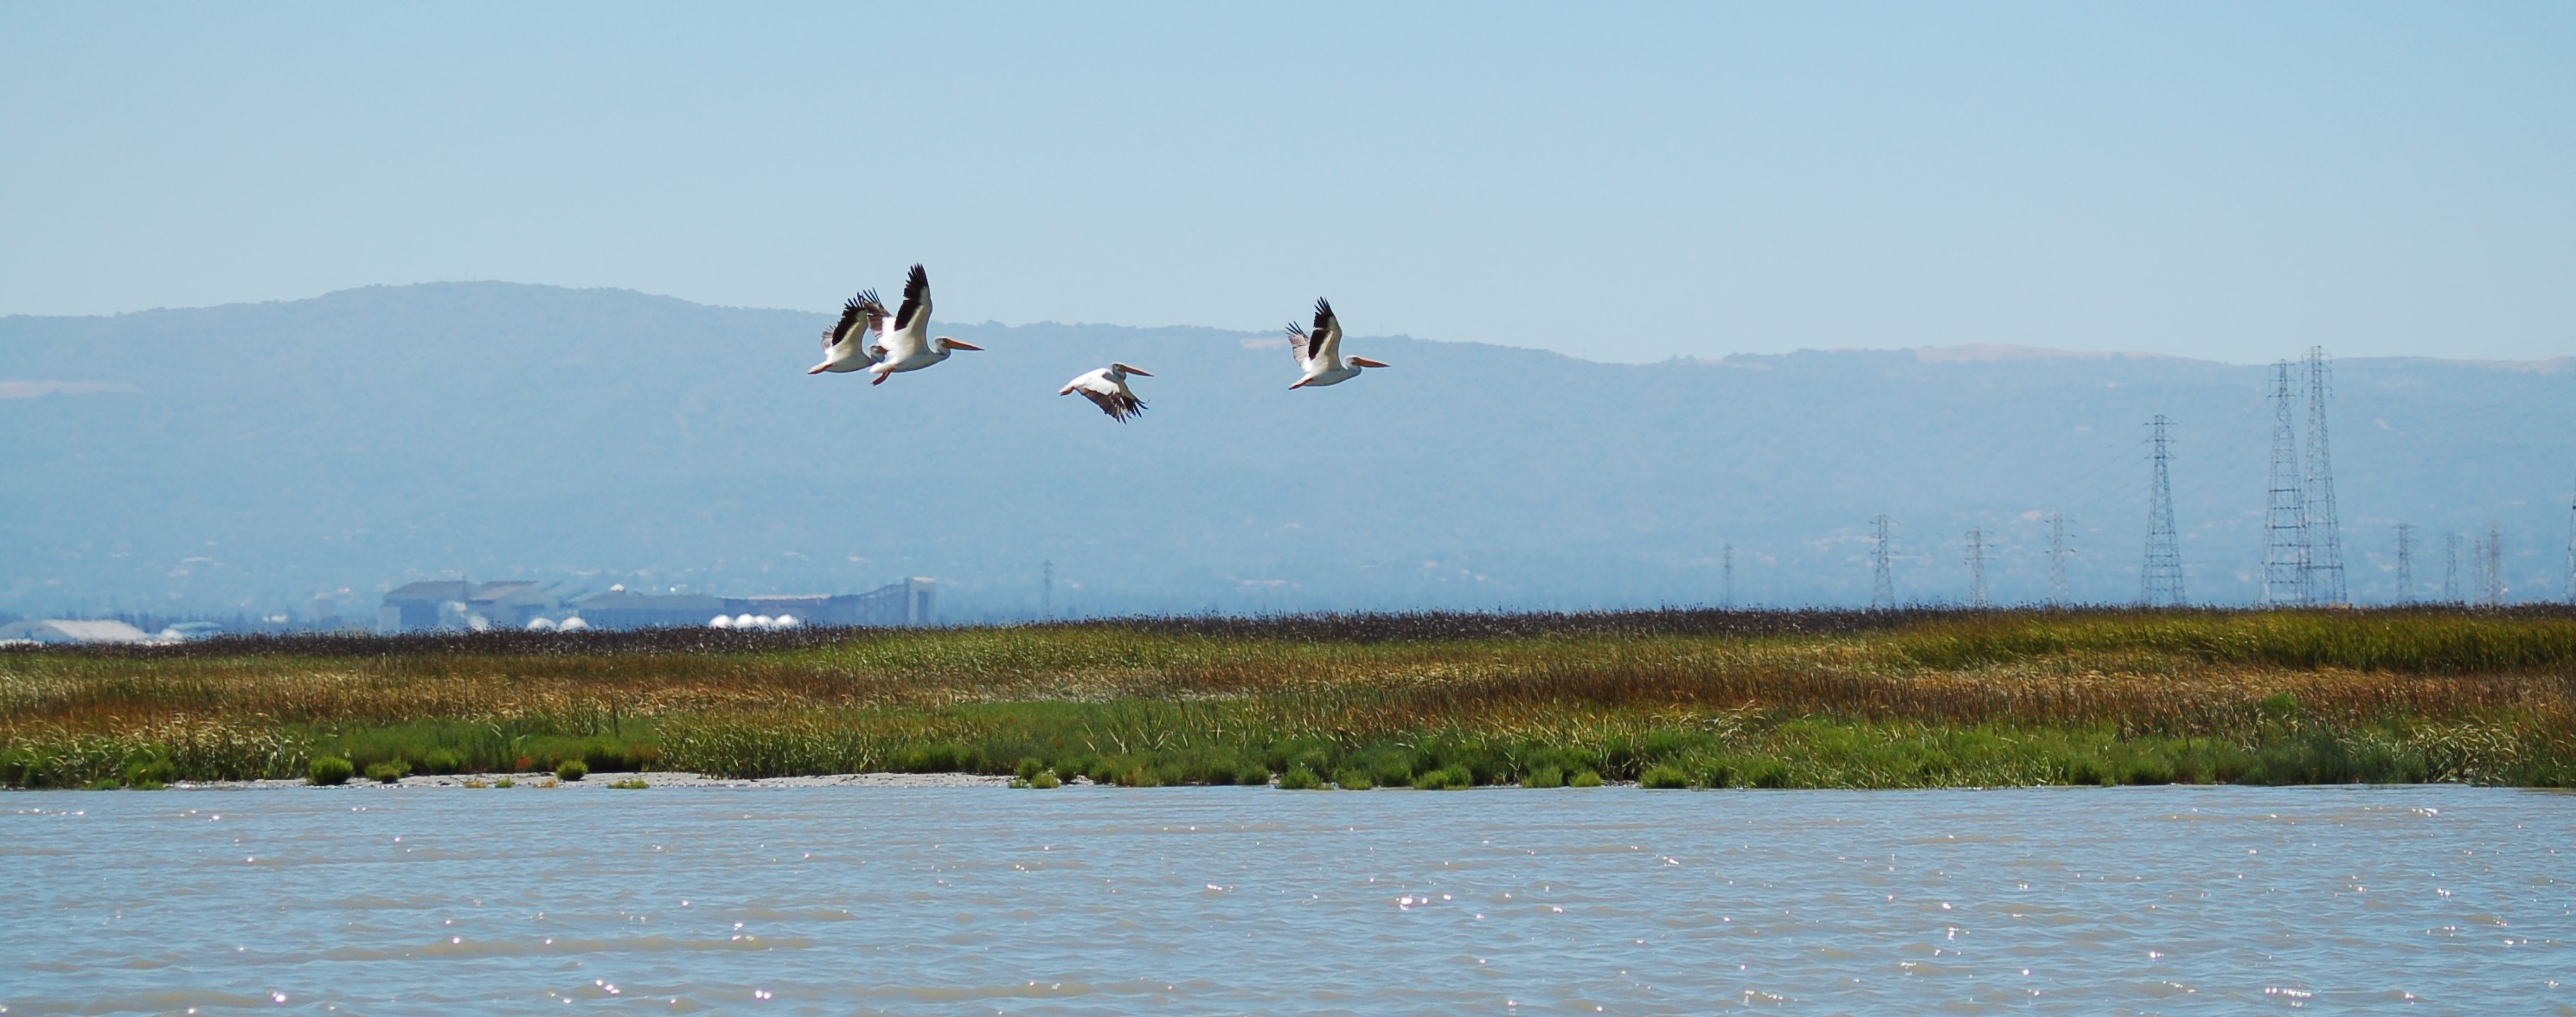 Shorebirds flying over the Bay waters with wetlands in the background.